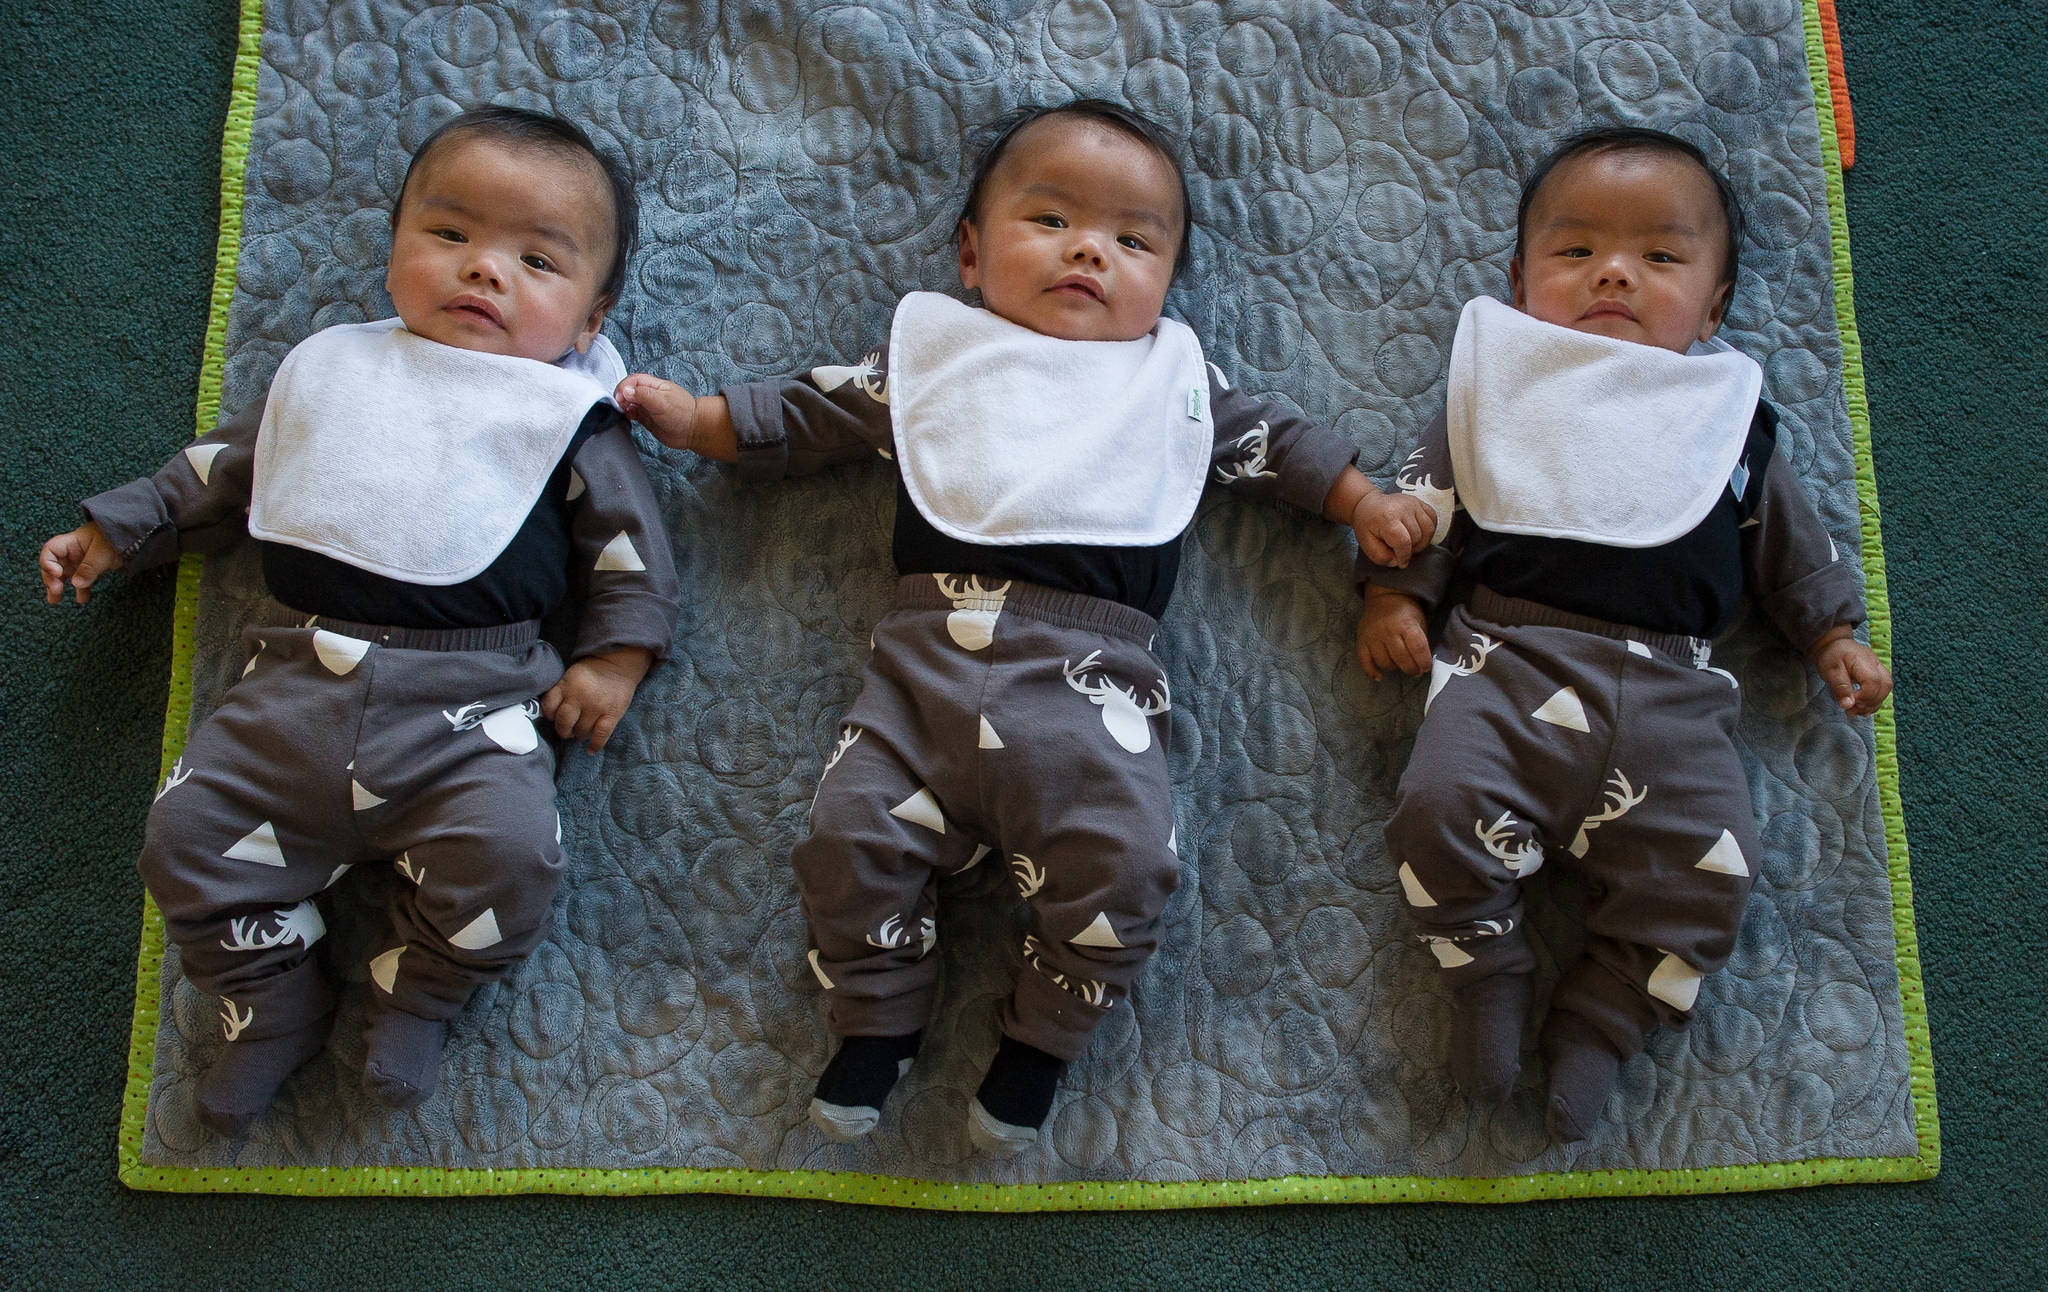 Liam, Lawrence and Logan David are identical triplets born on April 23, 2017, to parents John David and Lory Rowe. They were photographed at their Mendenhall Valley home on Tuesday, Oct. 10, 2017. (Michael Penn | Juneau Empire)